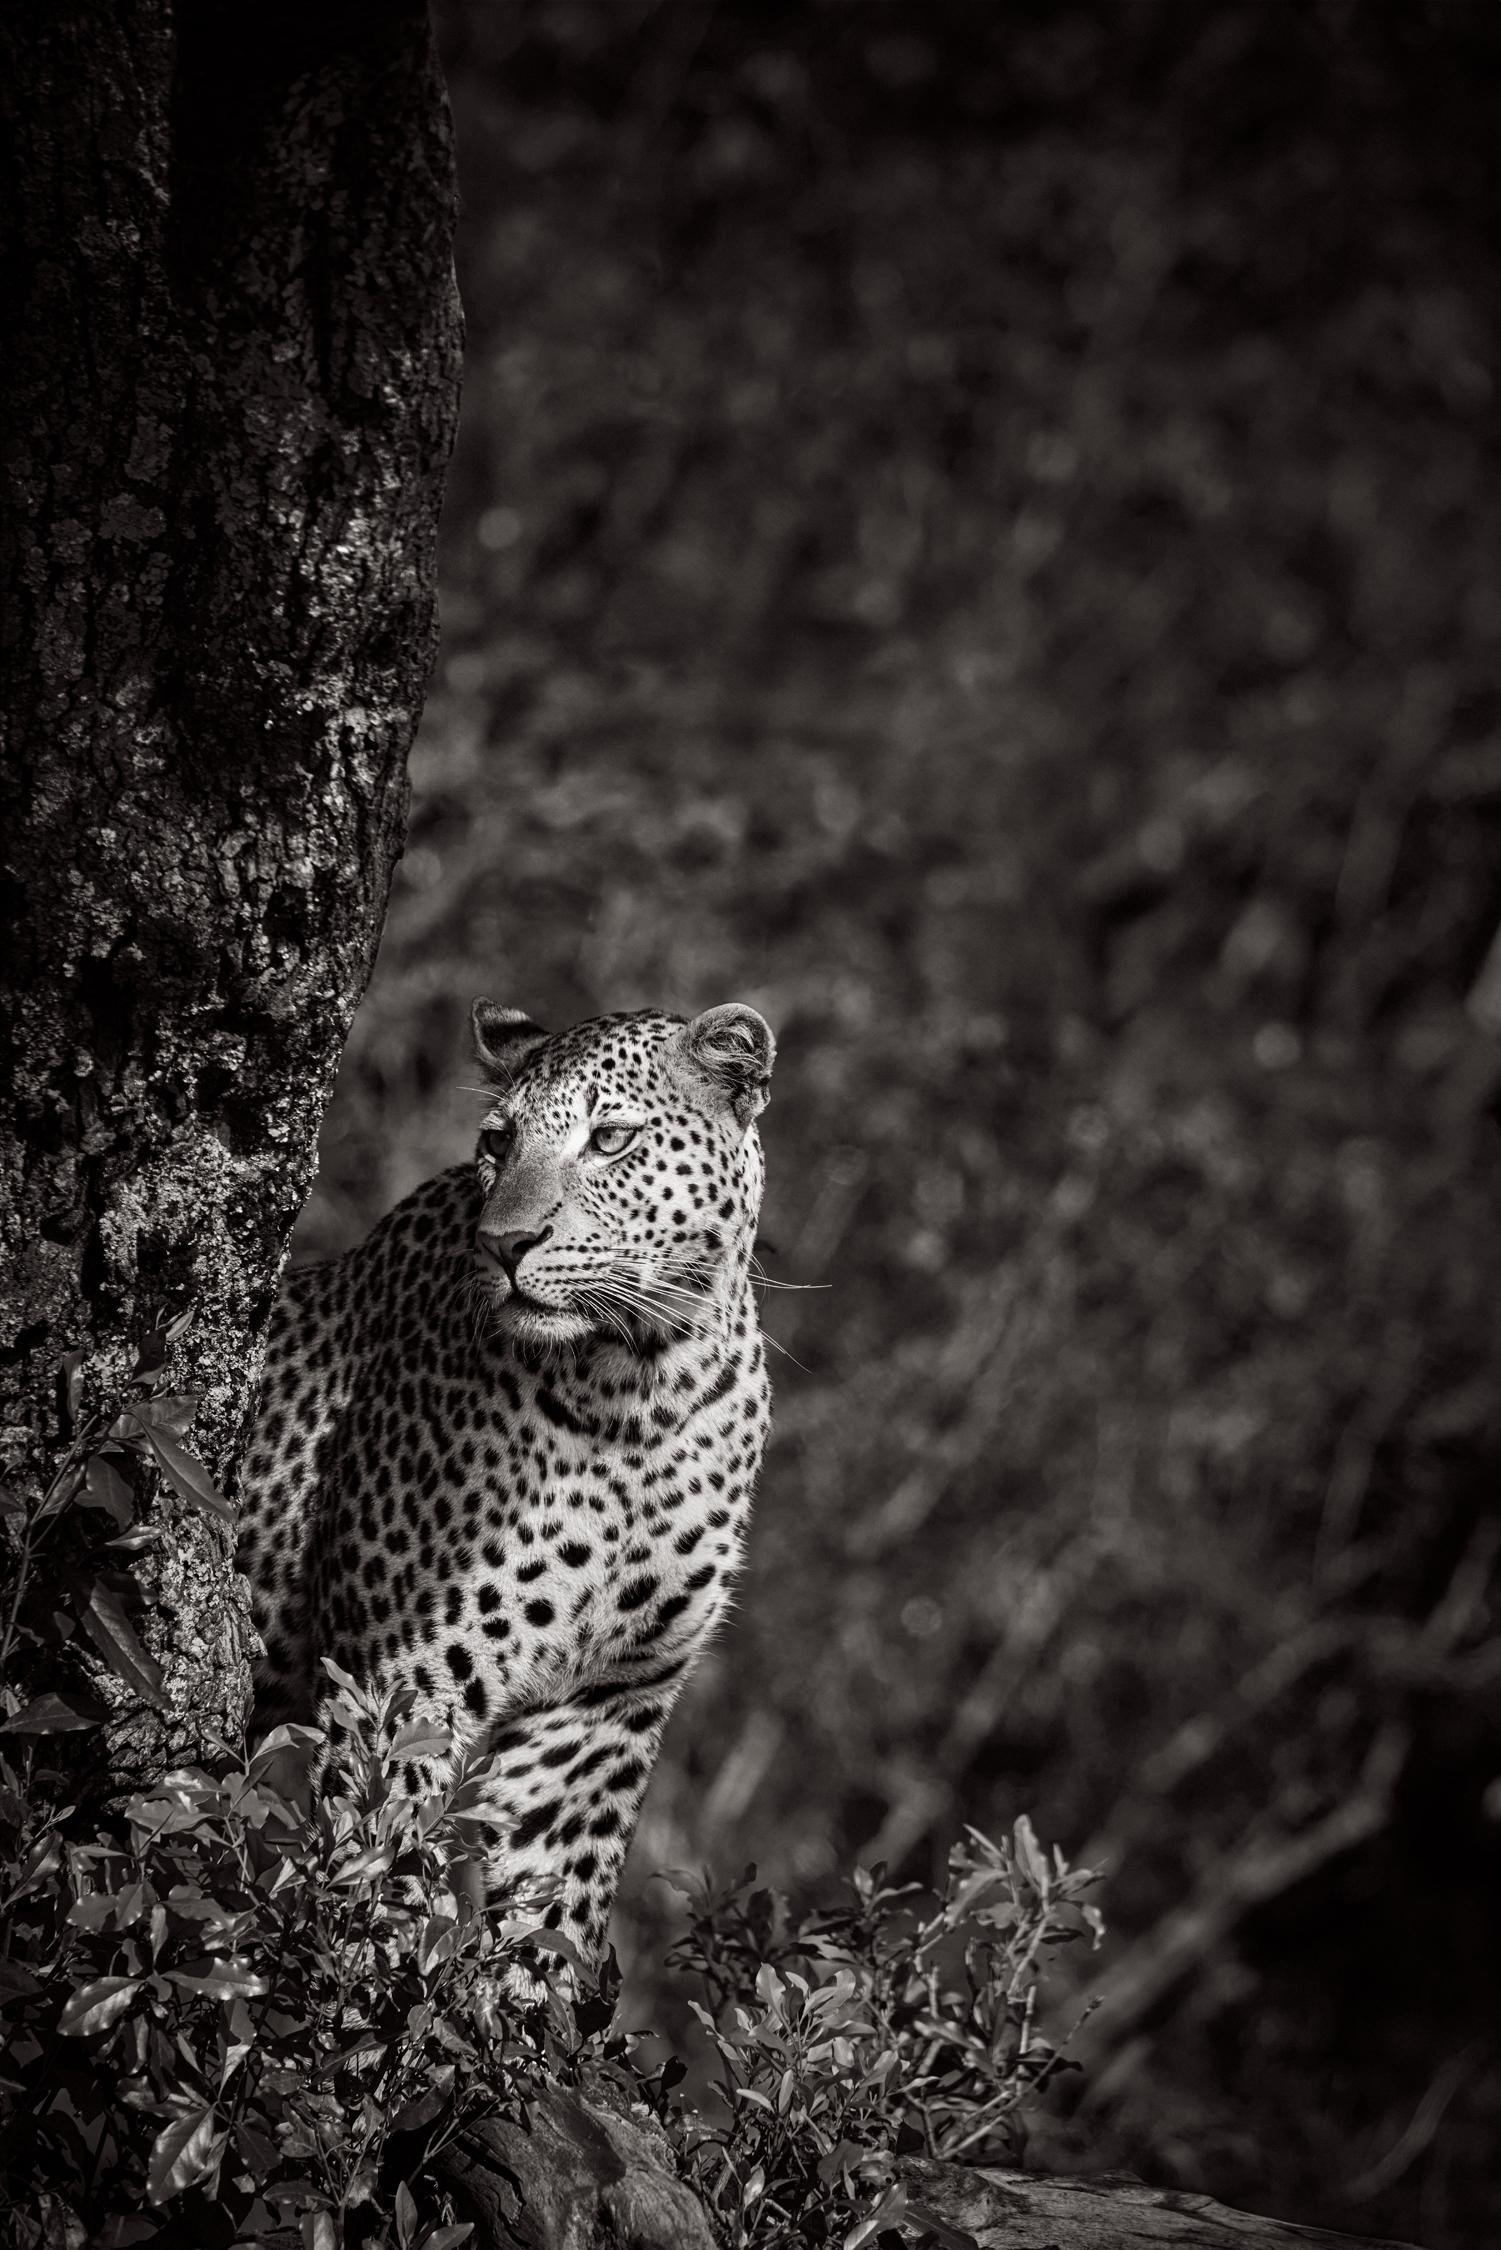 Drew Doggett Black and White Photograph - Ethereal portrait of a leopard in a tree